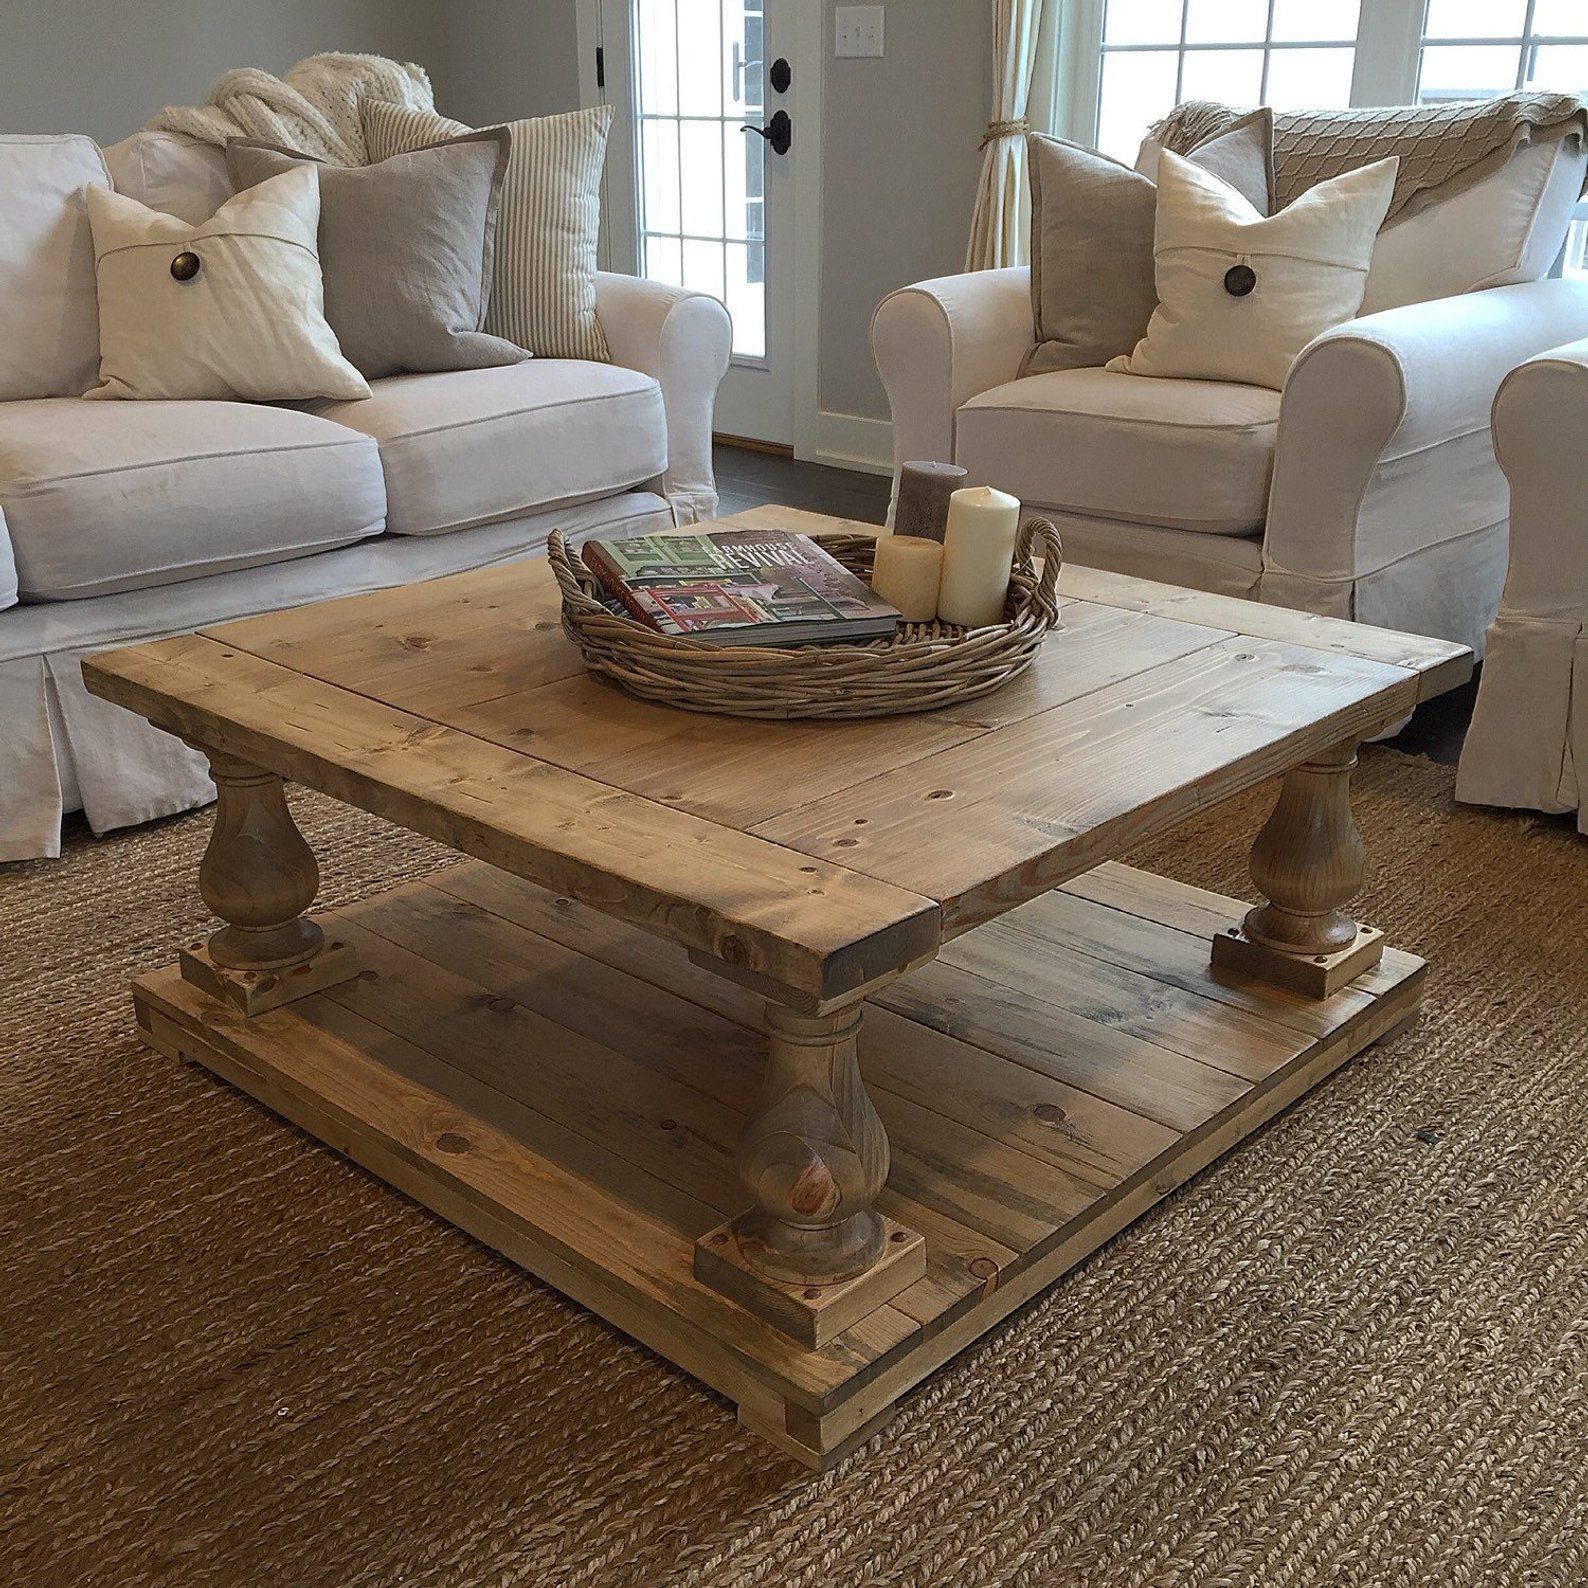 5 Reasons To Invest In A Rustic Farmhouse Coffee Table – Coffee Table Decor In Living Room Farmhouse Coffee Tables (View 17 of 20)